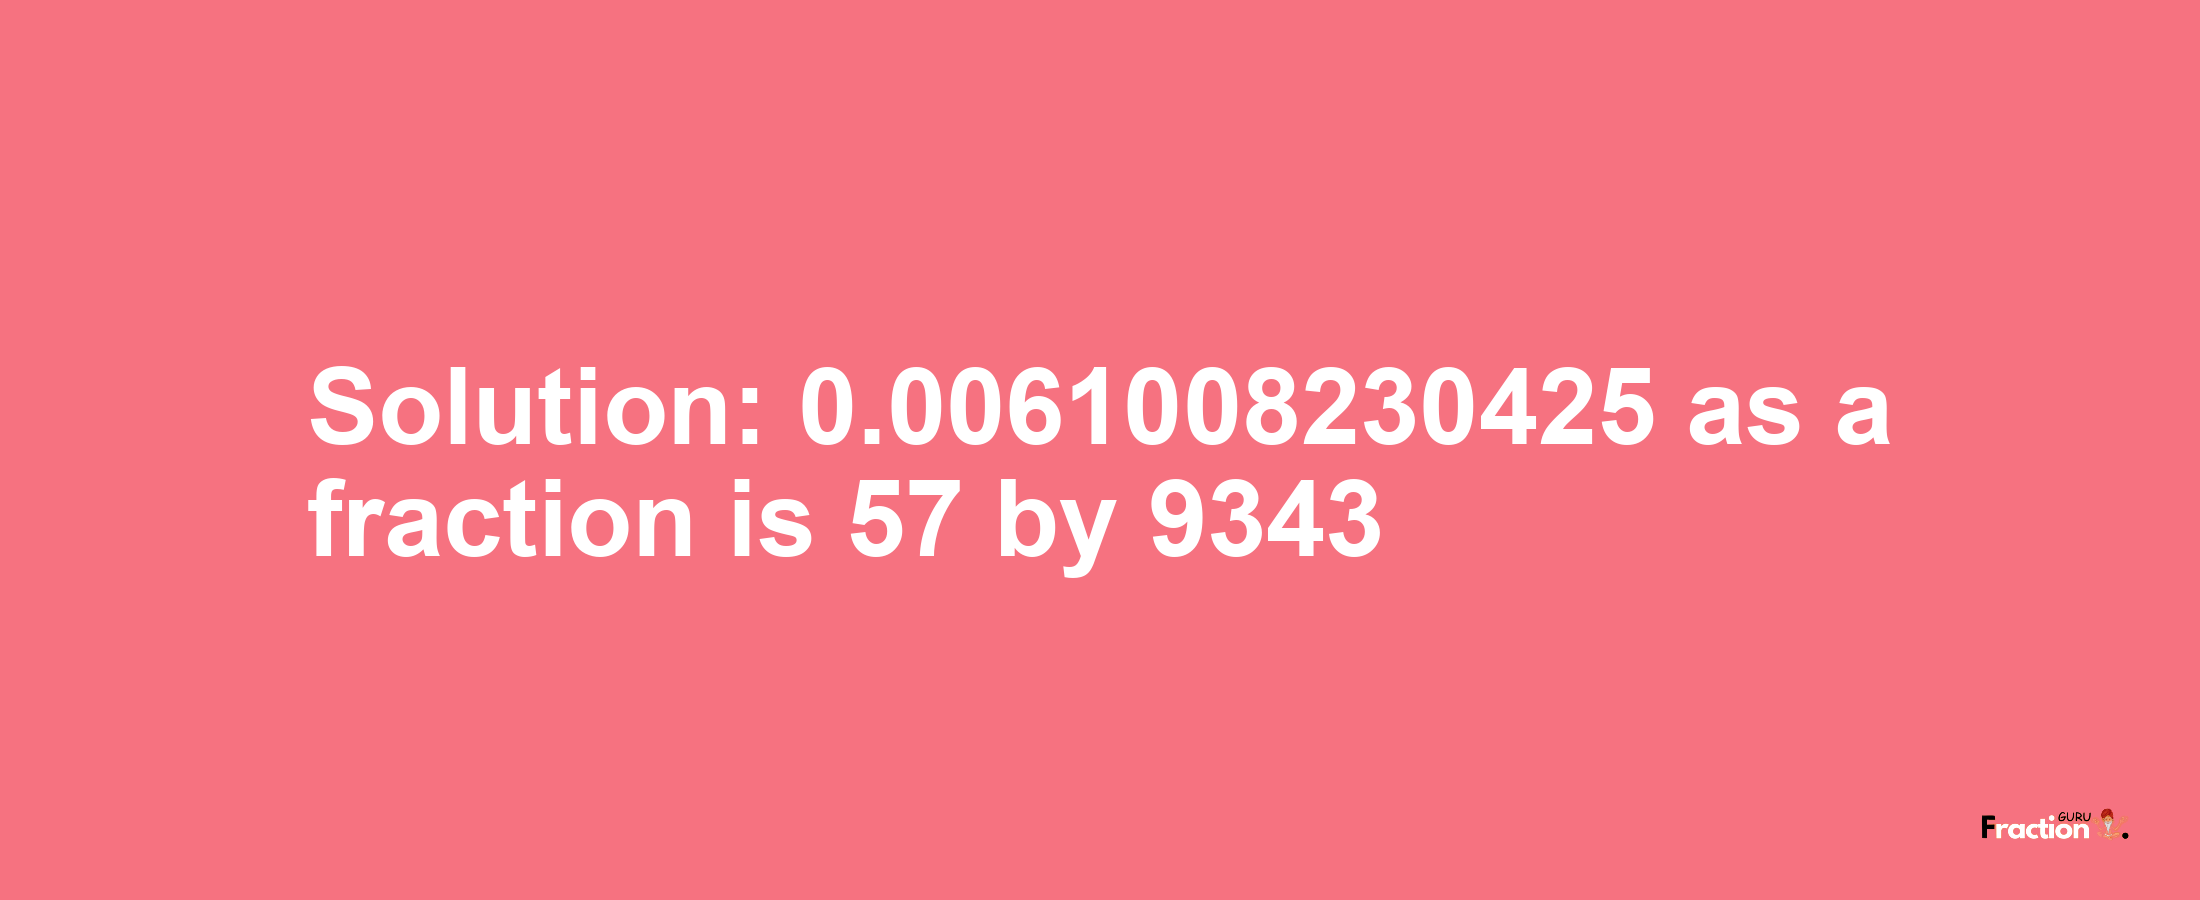 Solution:0.0061008230425 as a fraction is 57/9343